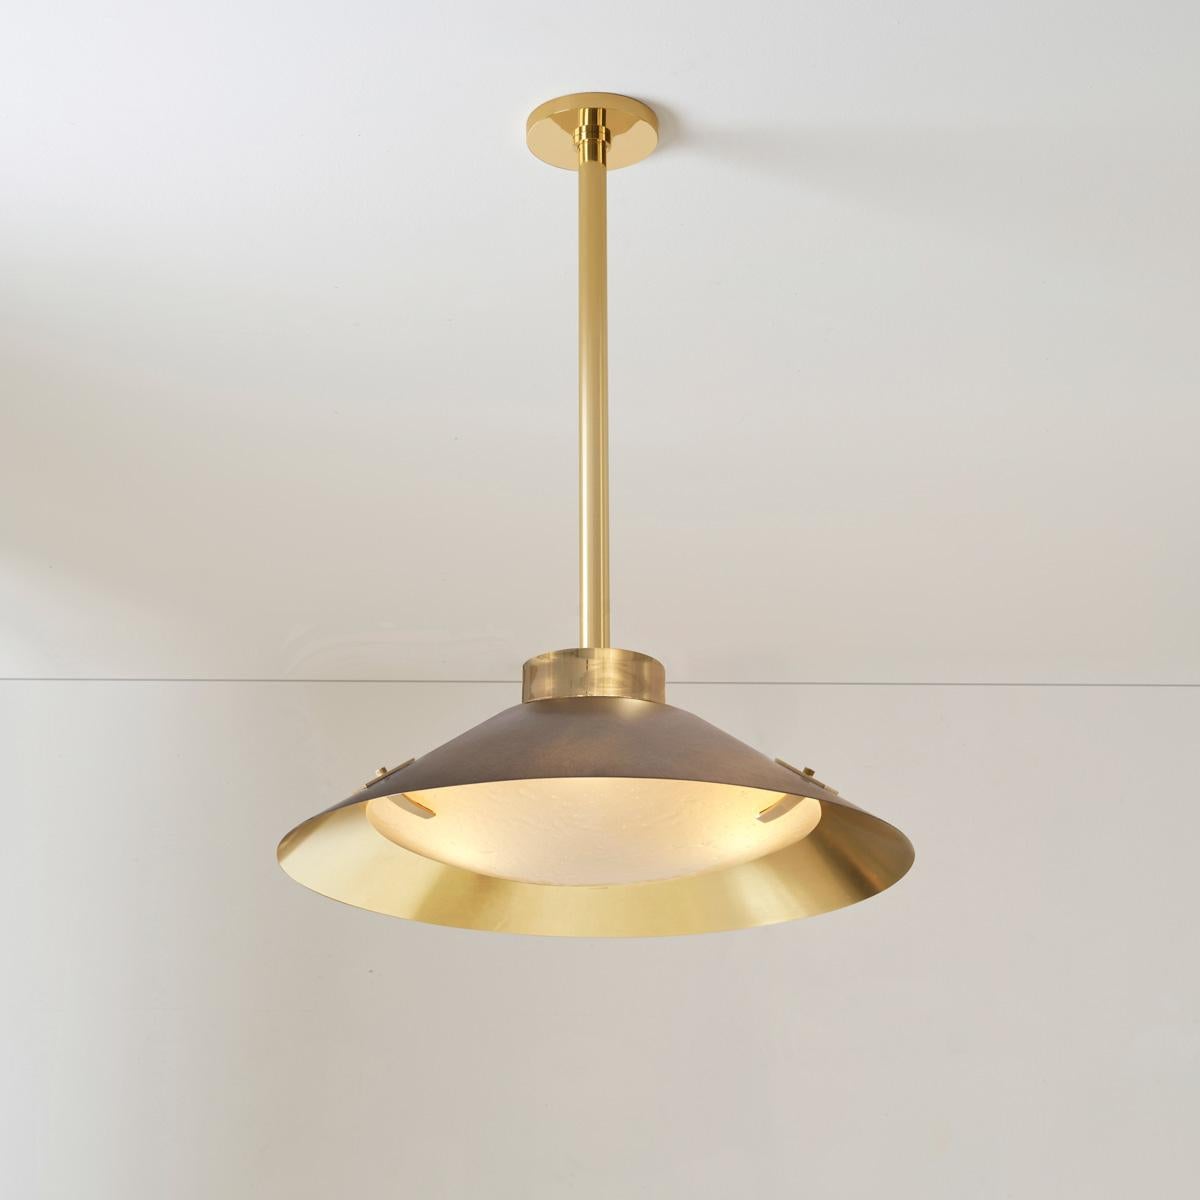 Kono Pendant by Gaspare Asaro. Satin Brass and Stone Grey For Sale 1